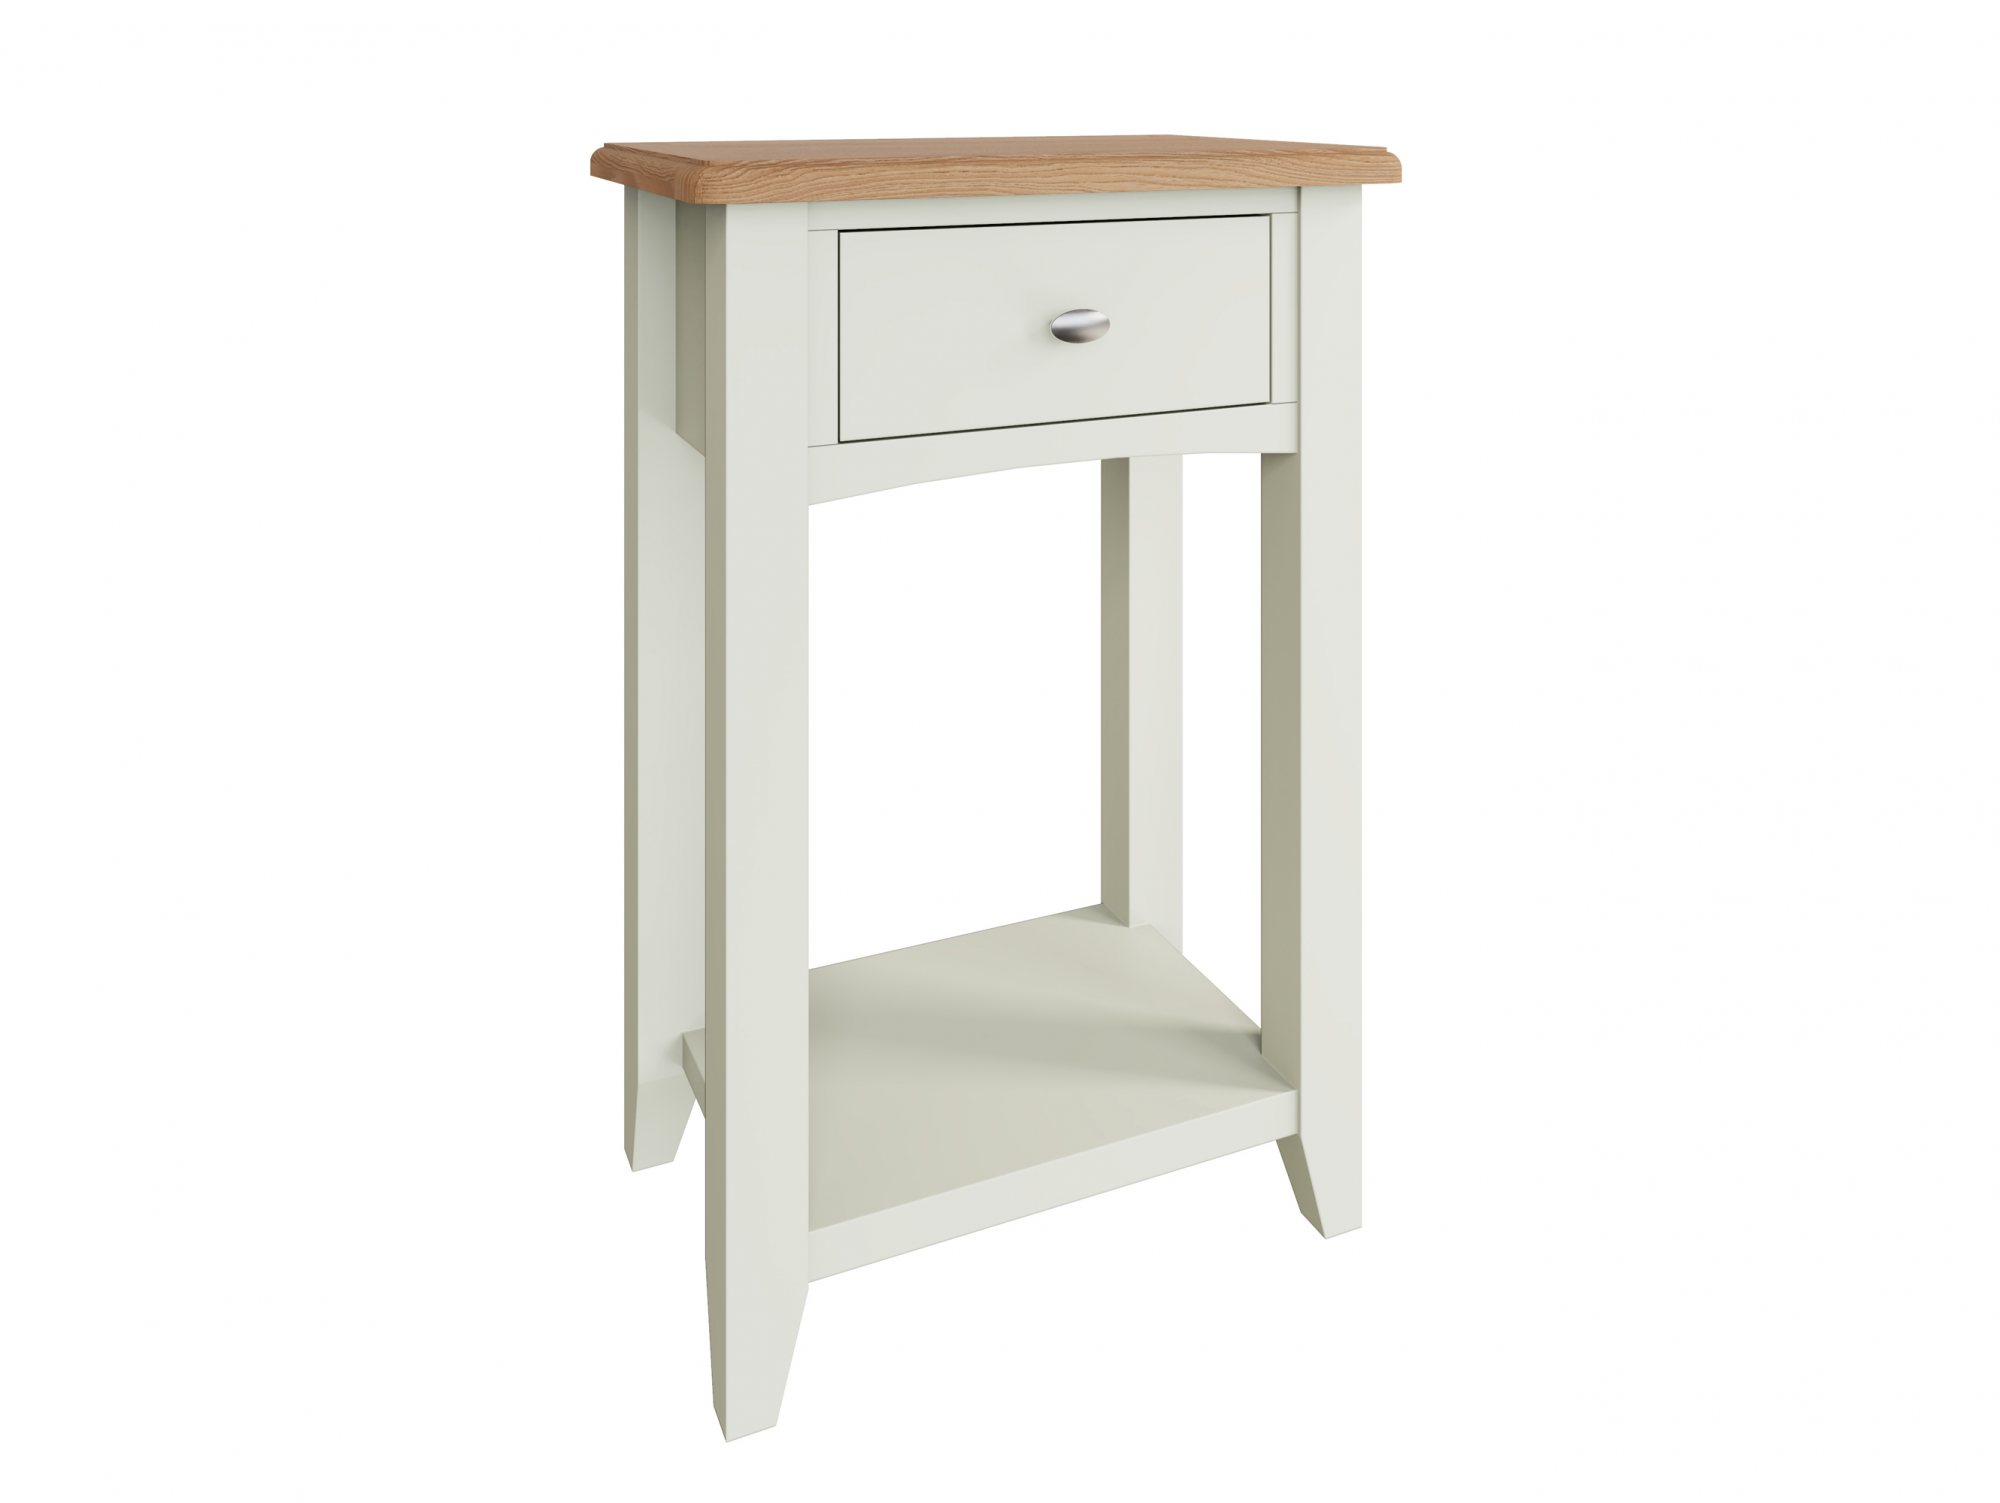 Kenmore Kenmore Patterdale White and 1 Drawer Tall Lamp Table (Assembled)